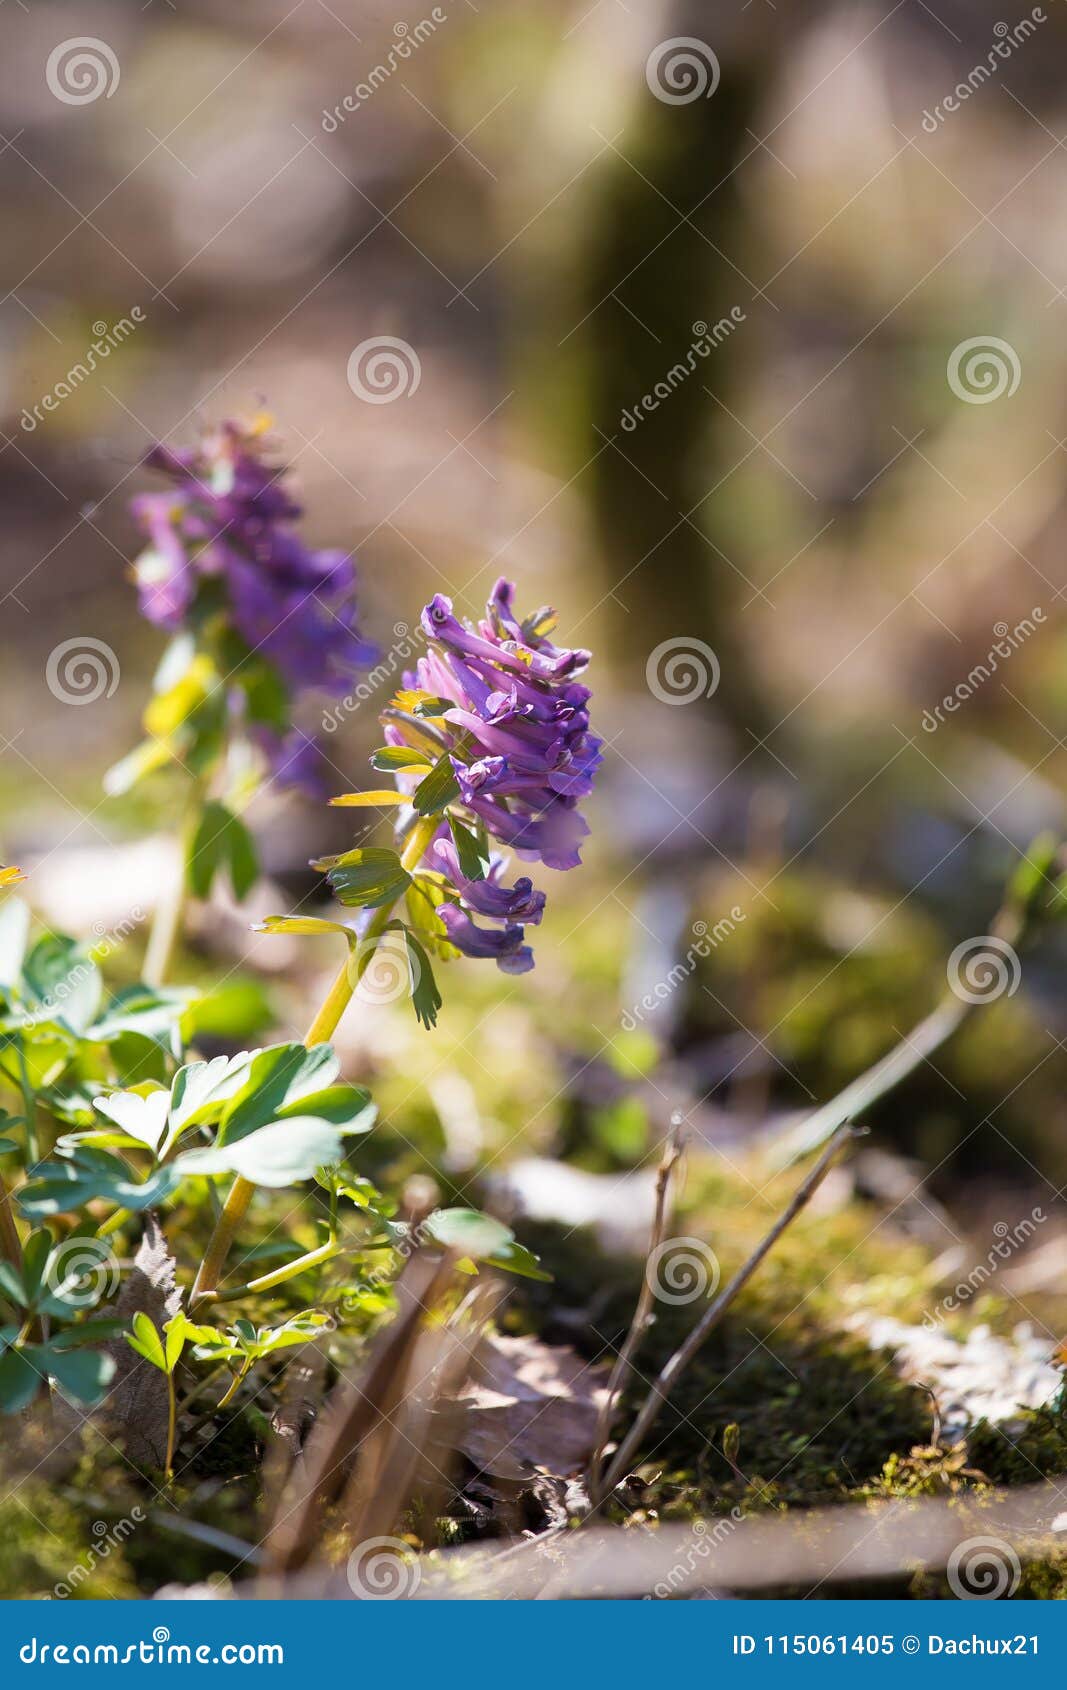 A Beautiful Purple Flower Blooming On The Ground Of Forest Floor